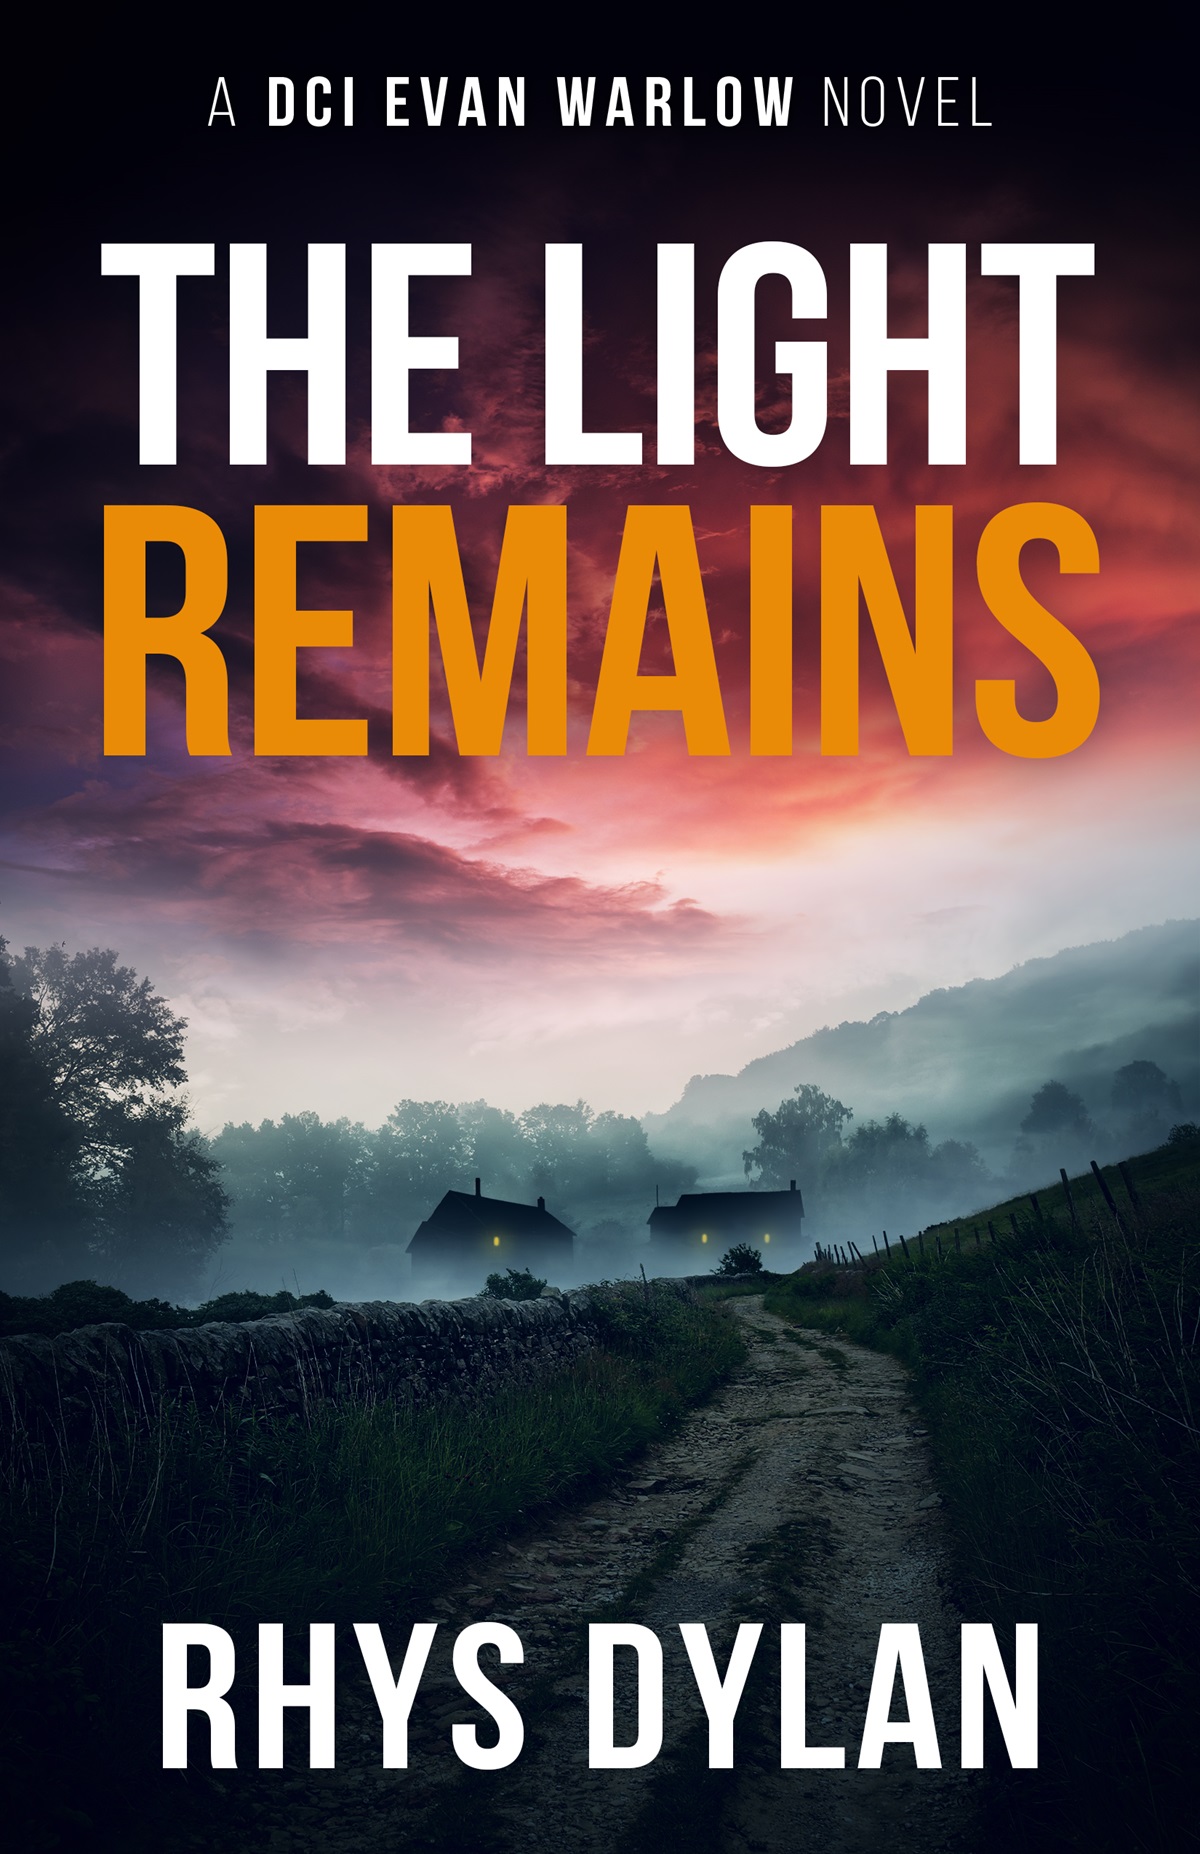 The Light Remains by Rhys Dylan